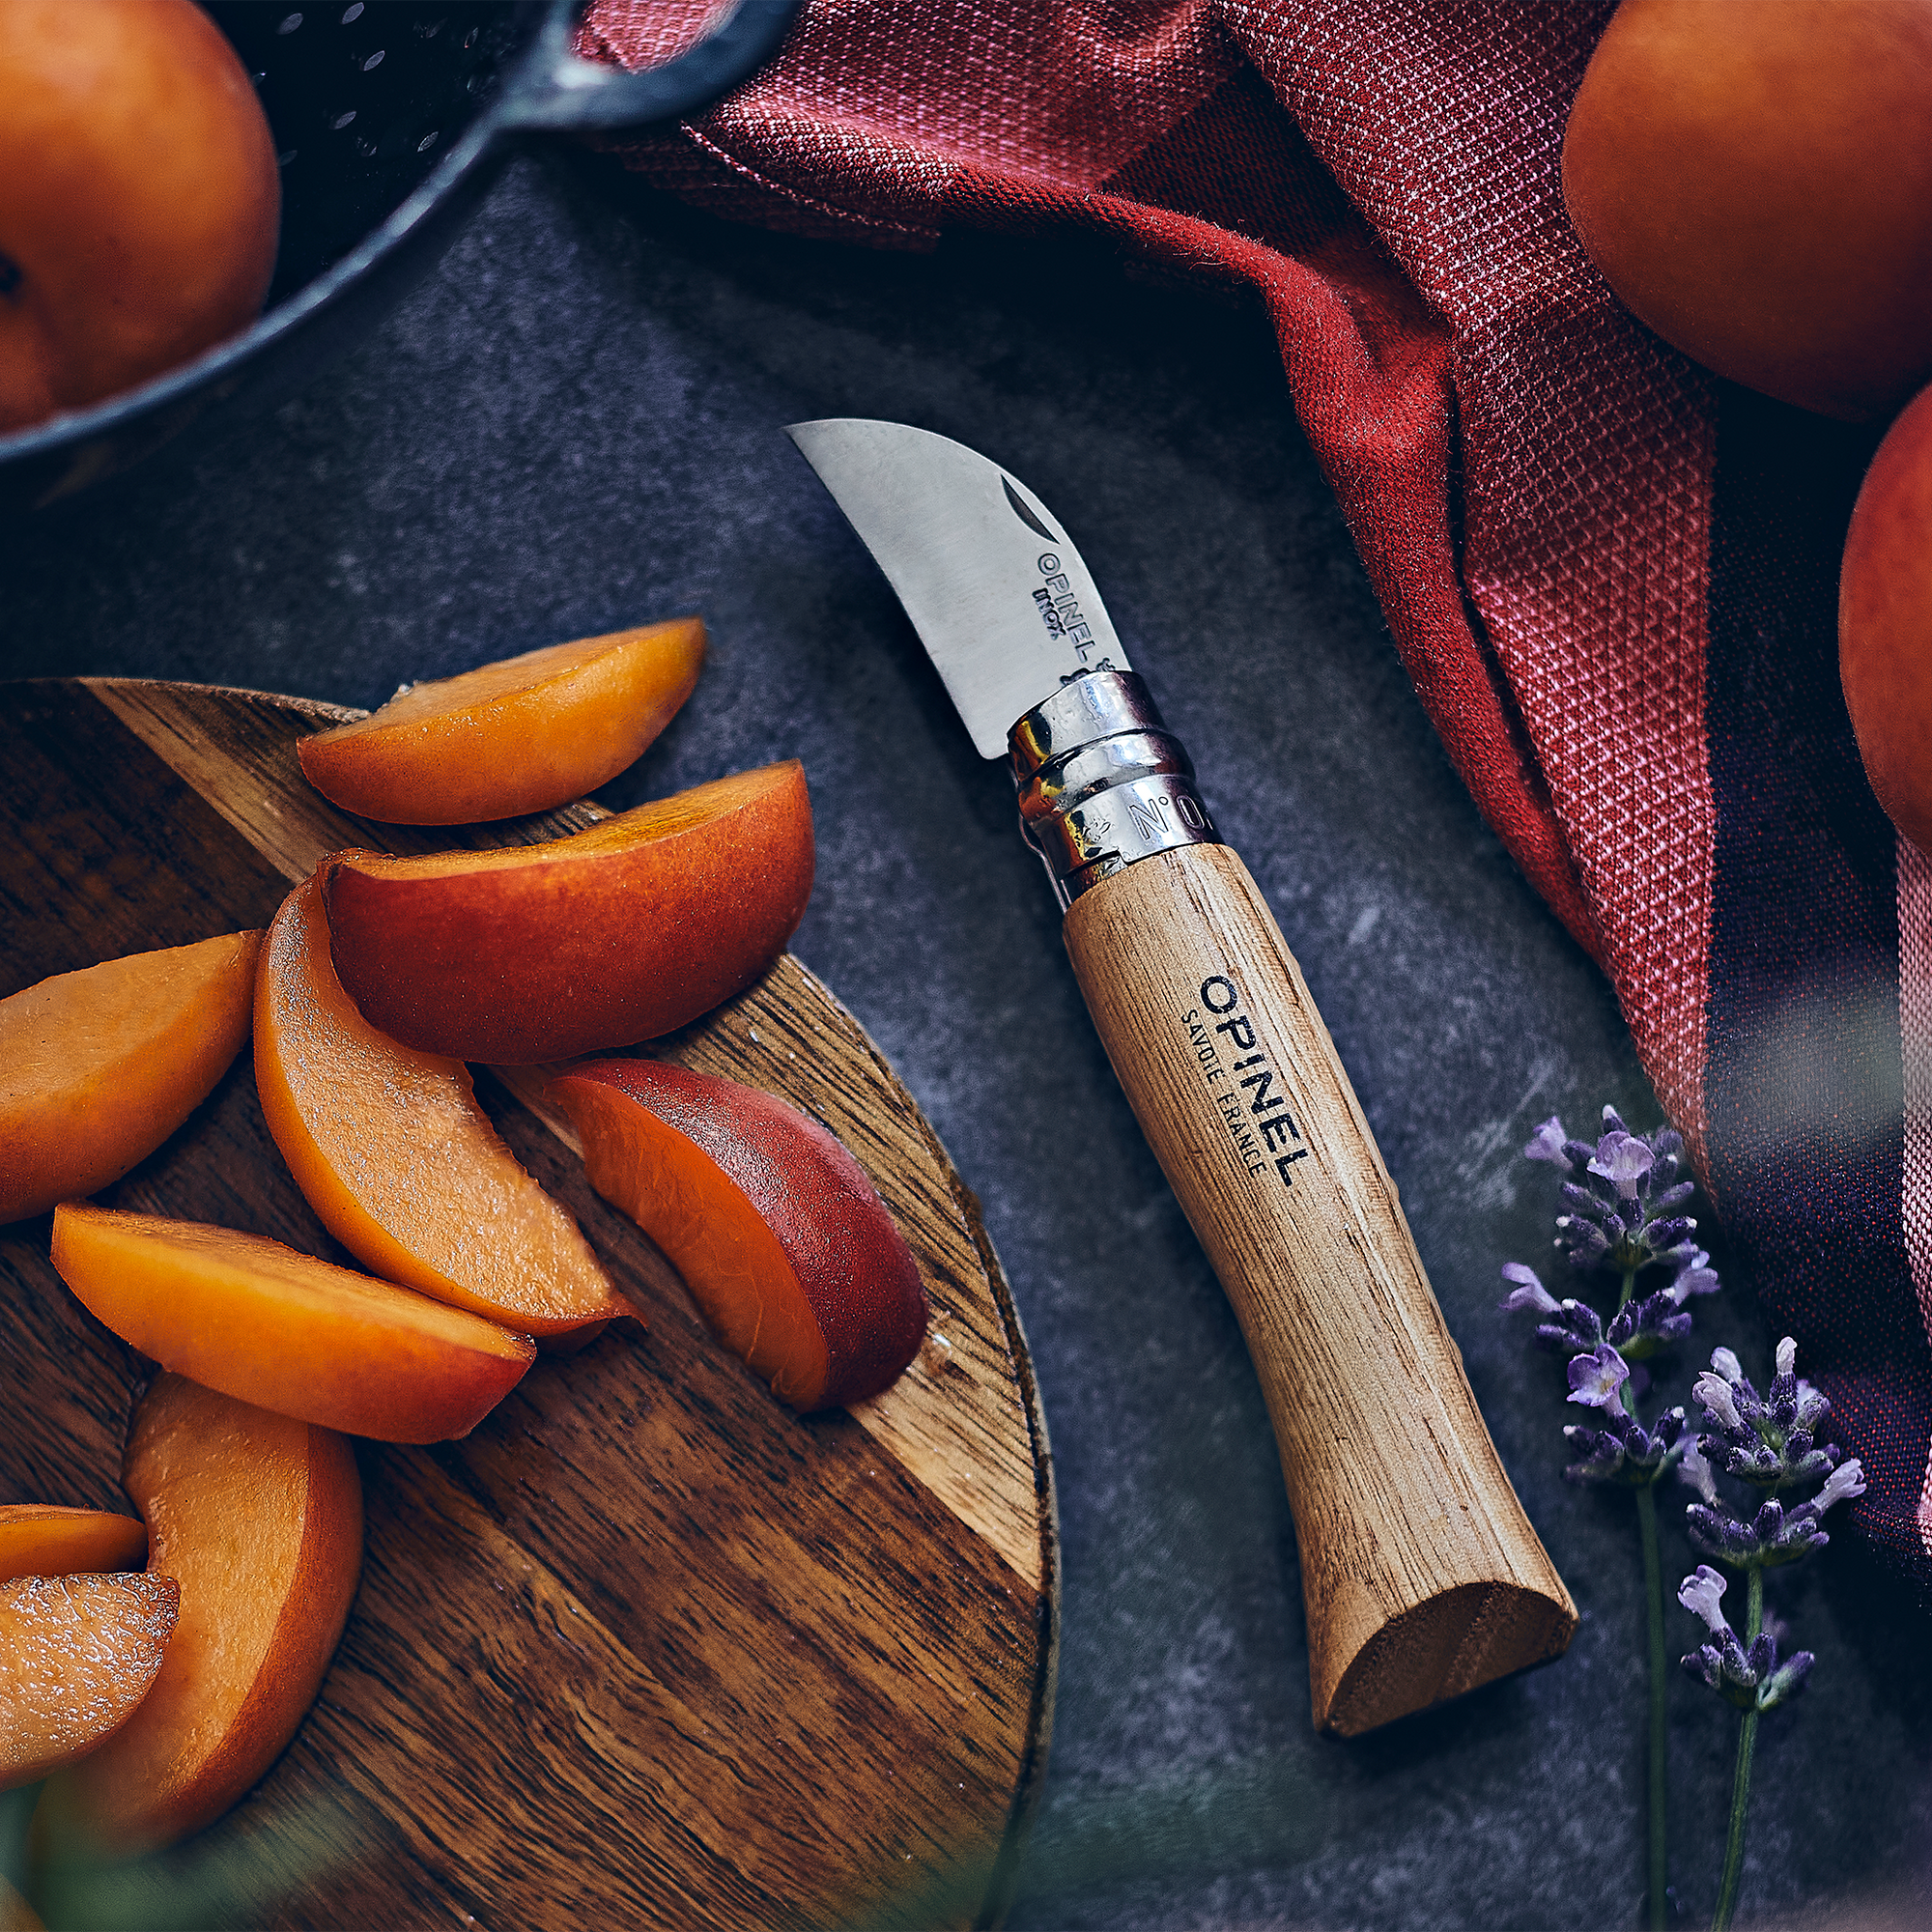 Opinel No. 7 Stainless Steel Knife